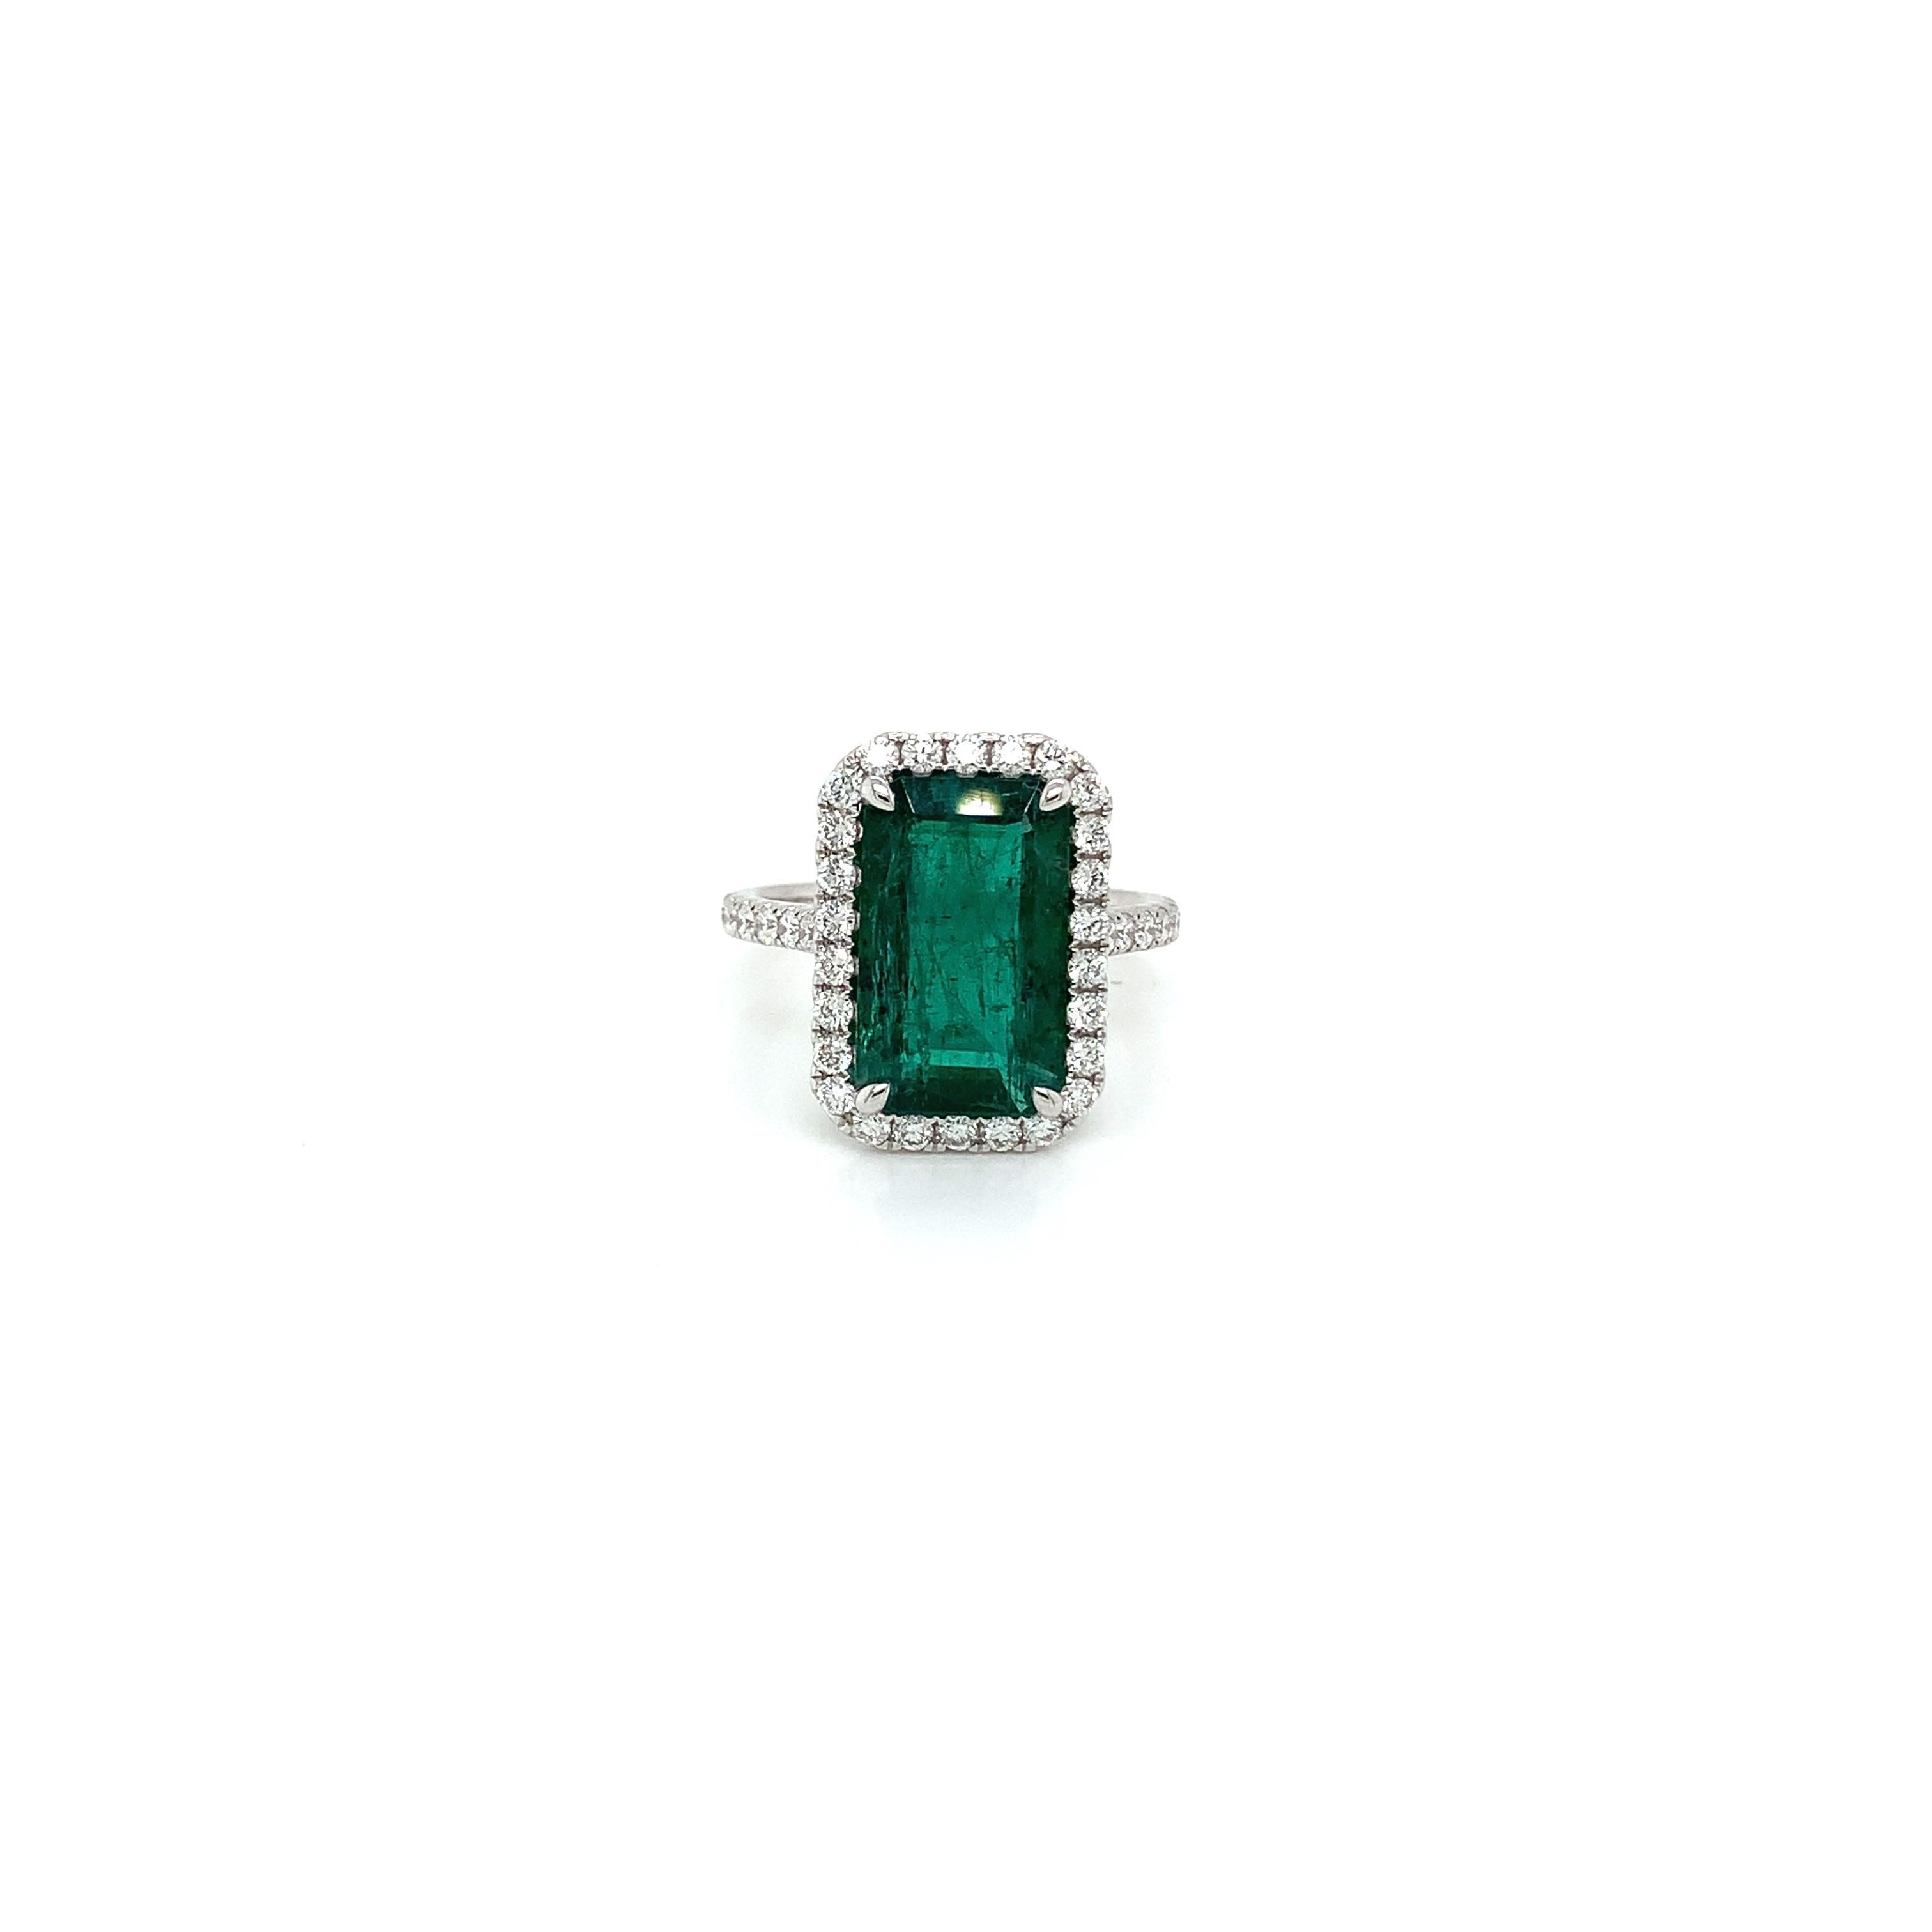 Certified 5.08 cts. E/C Emerald
Measuring (13.8x8.5) mm
40 pieces of round diamonds weighing .72 cts.
set in 18K white gold ring
Weighing 4.75 grams